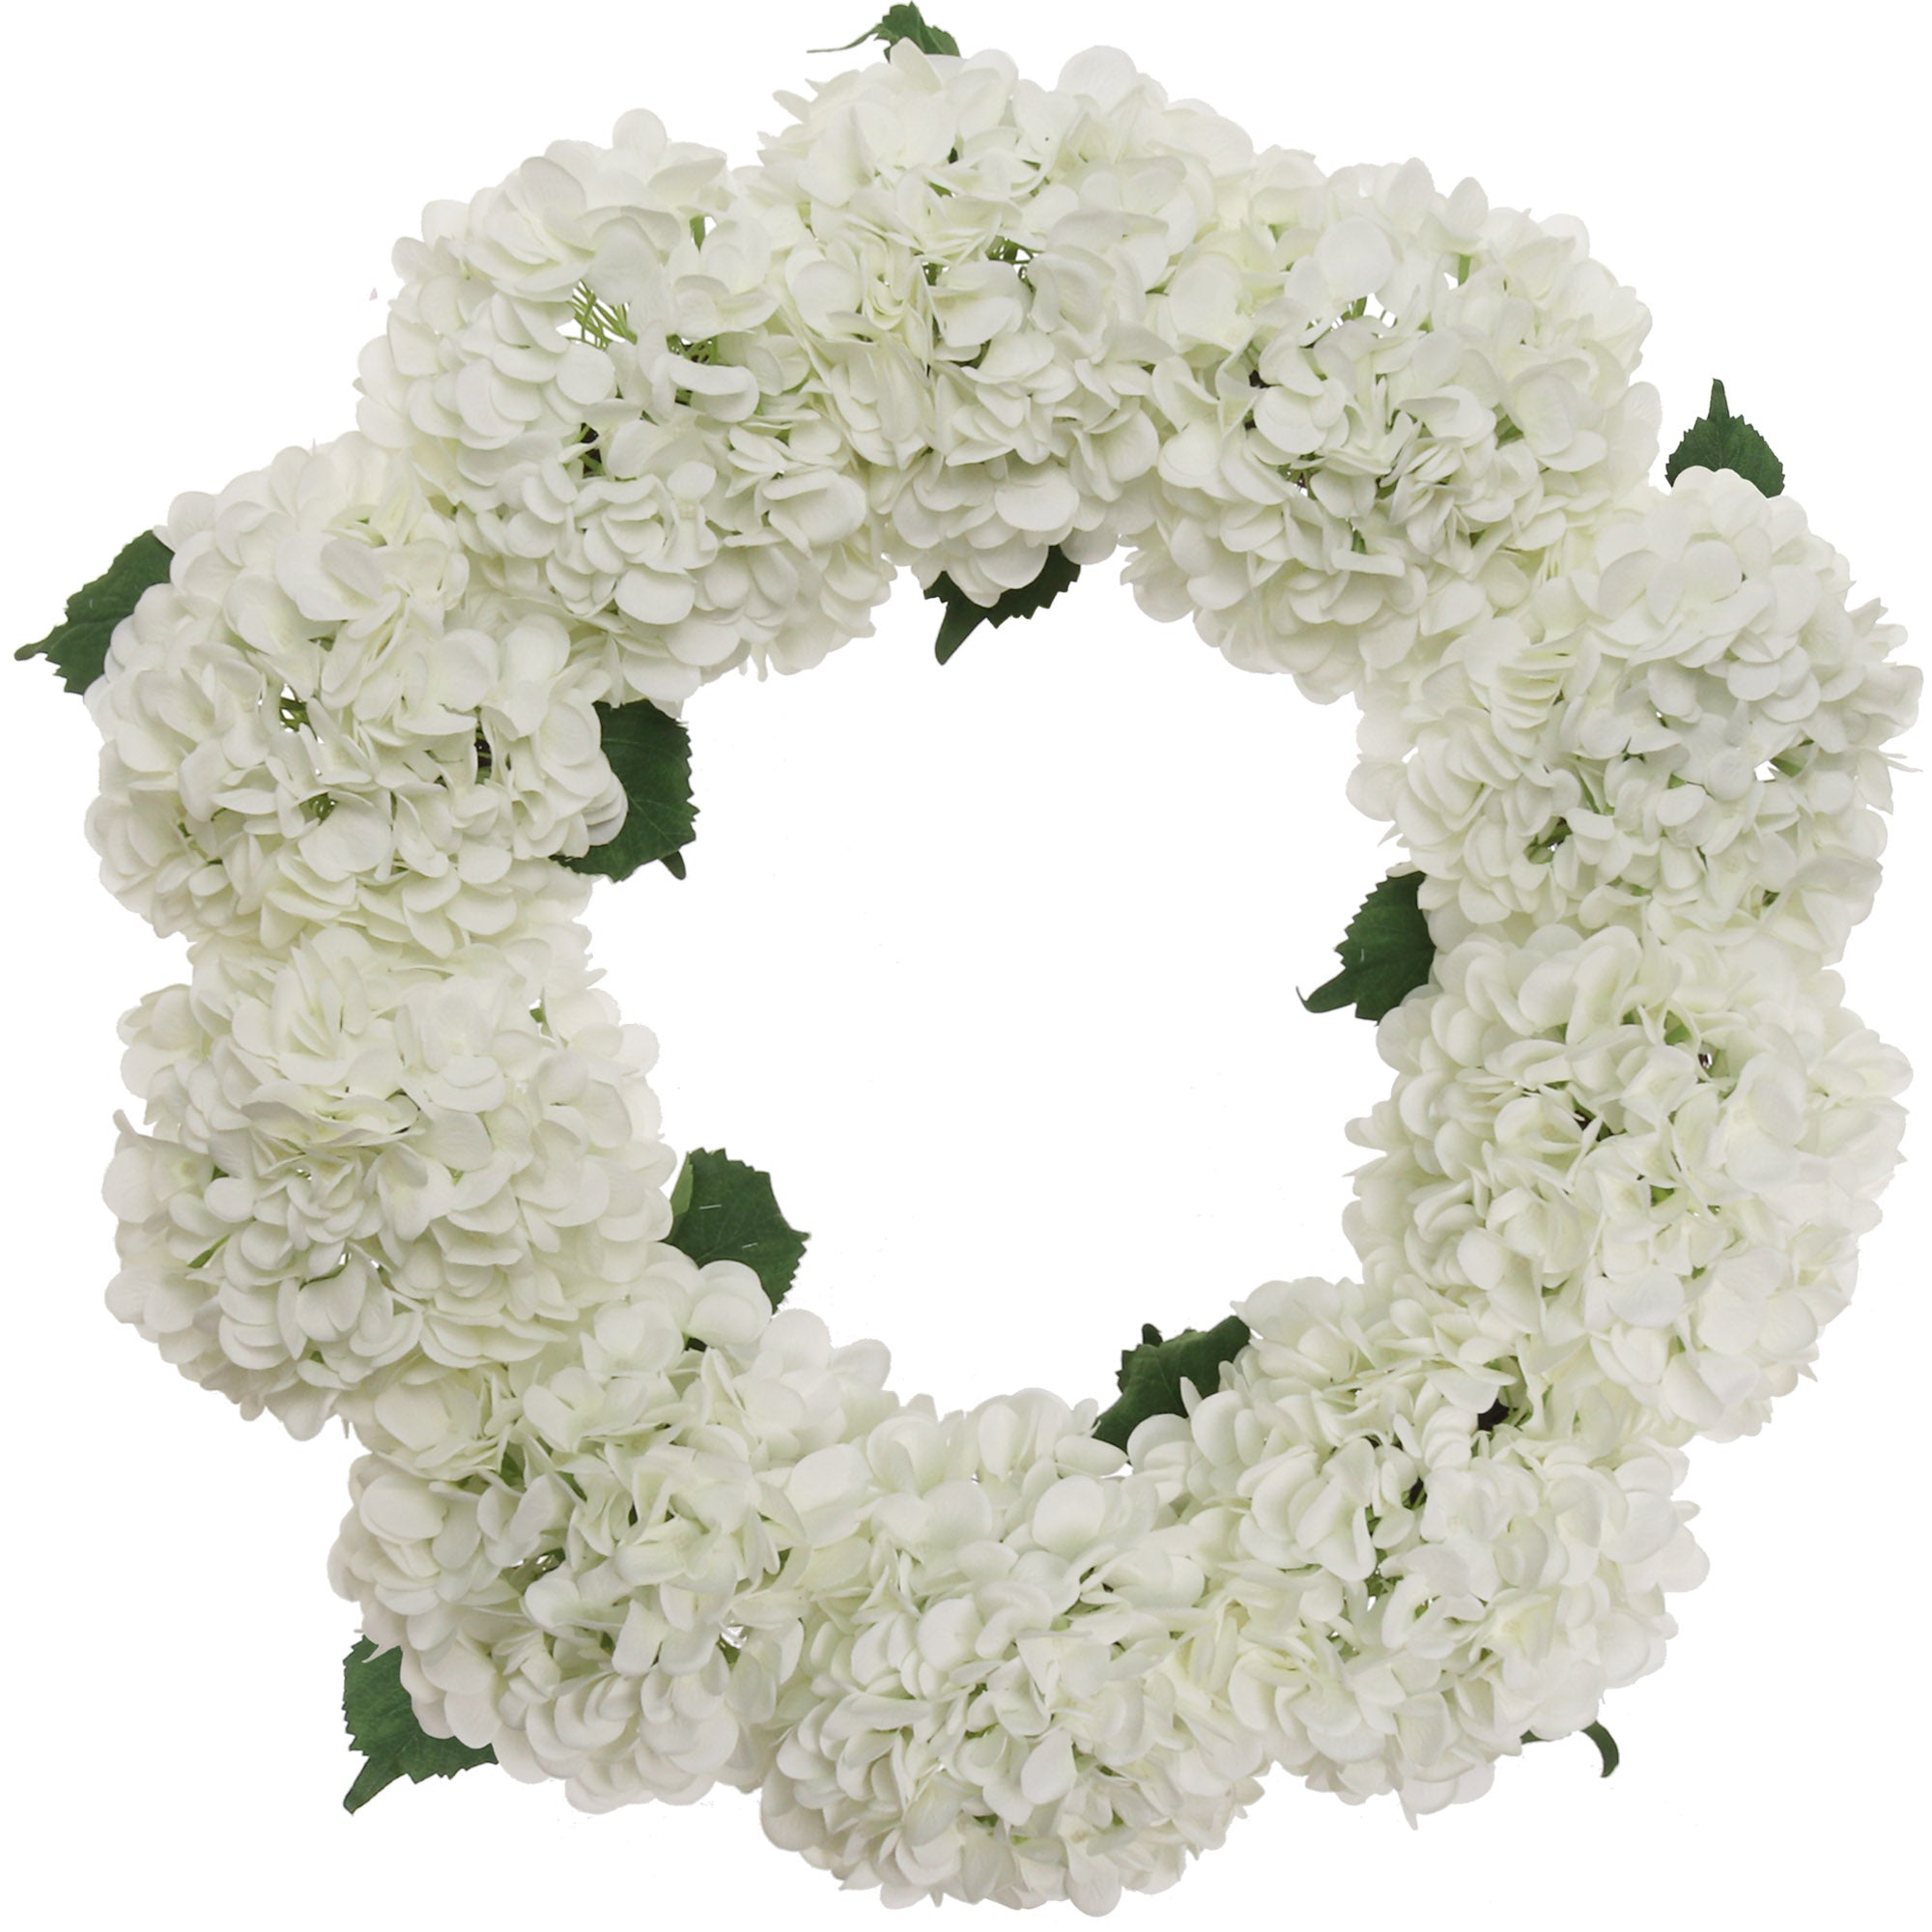 Artificial 24" White Hydrangea Wreath - Handcrafted, UV Resistant, All-Season, Indoor/Outdoor Decor, Perfect for Home, Wedding, Event Hydrangea Wreath ArtificialFlowers   